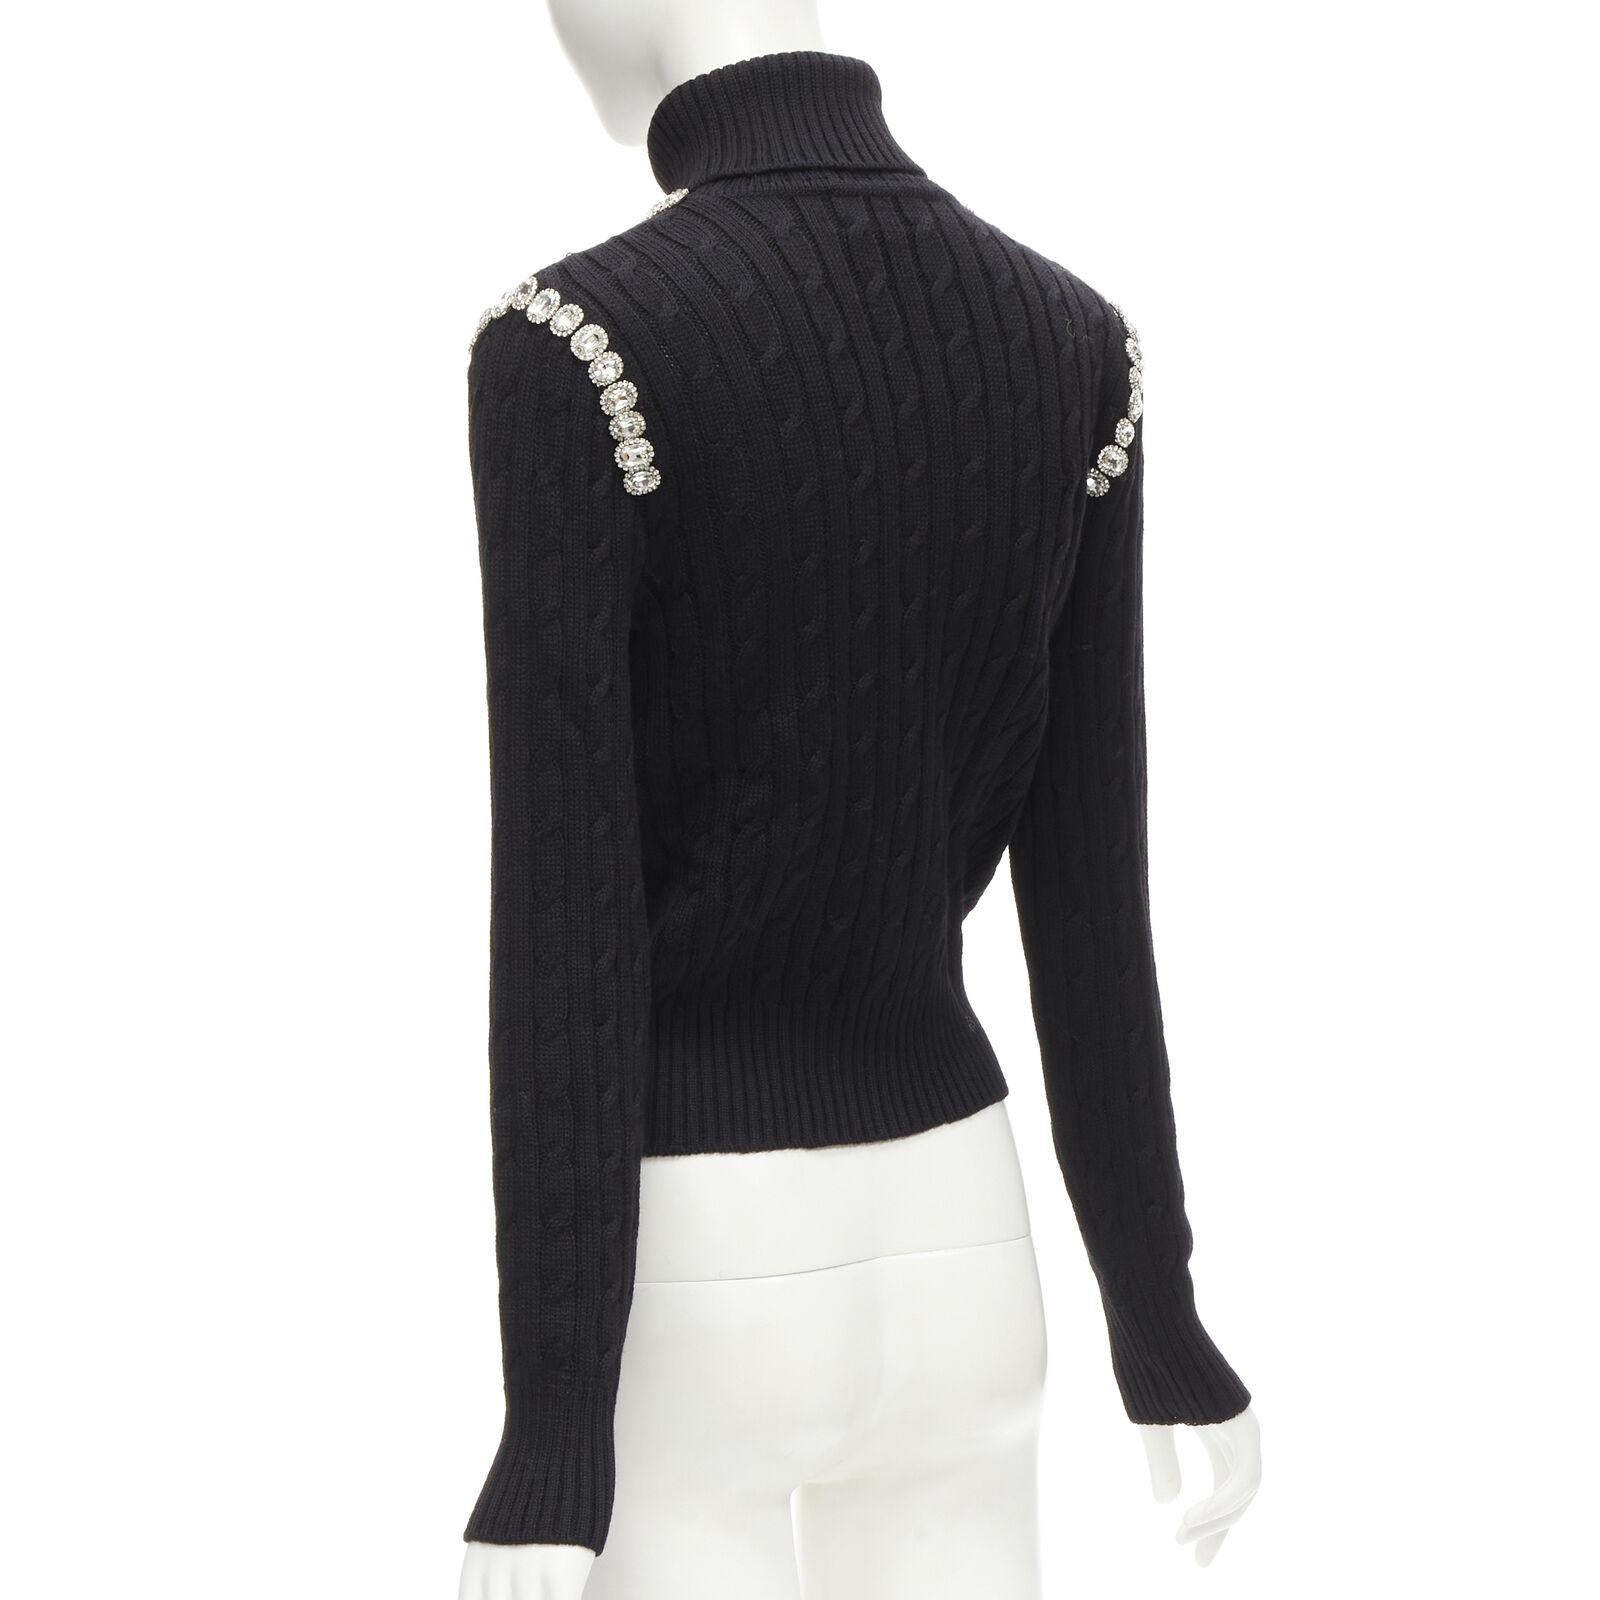 GIUSEPPE DI MORABITO black wool crystal embellished cable knit turtleneck IT38 For Sale 1